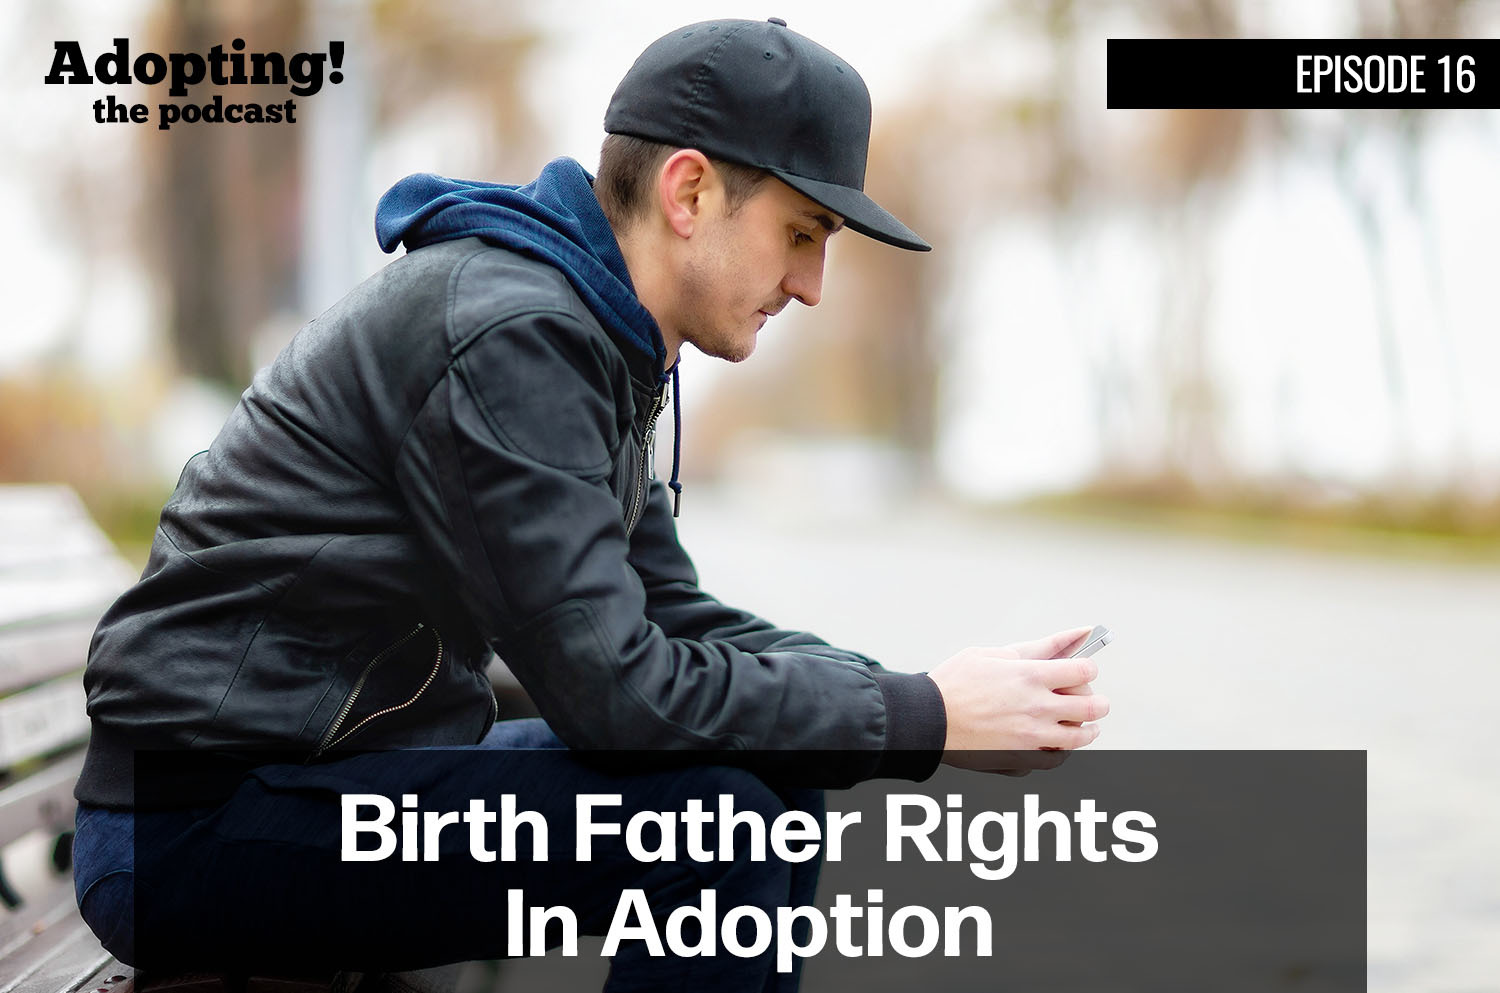 Birth father rights in adoption